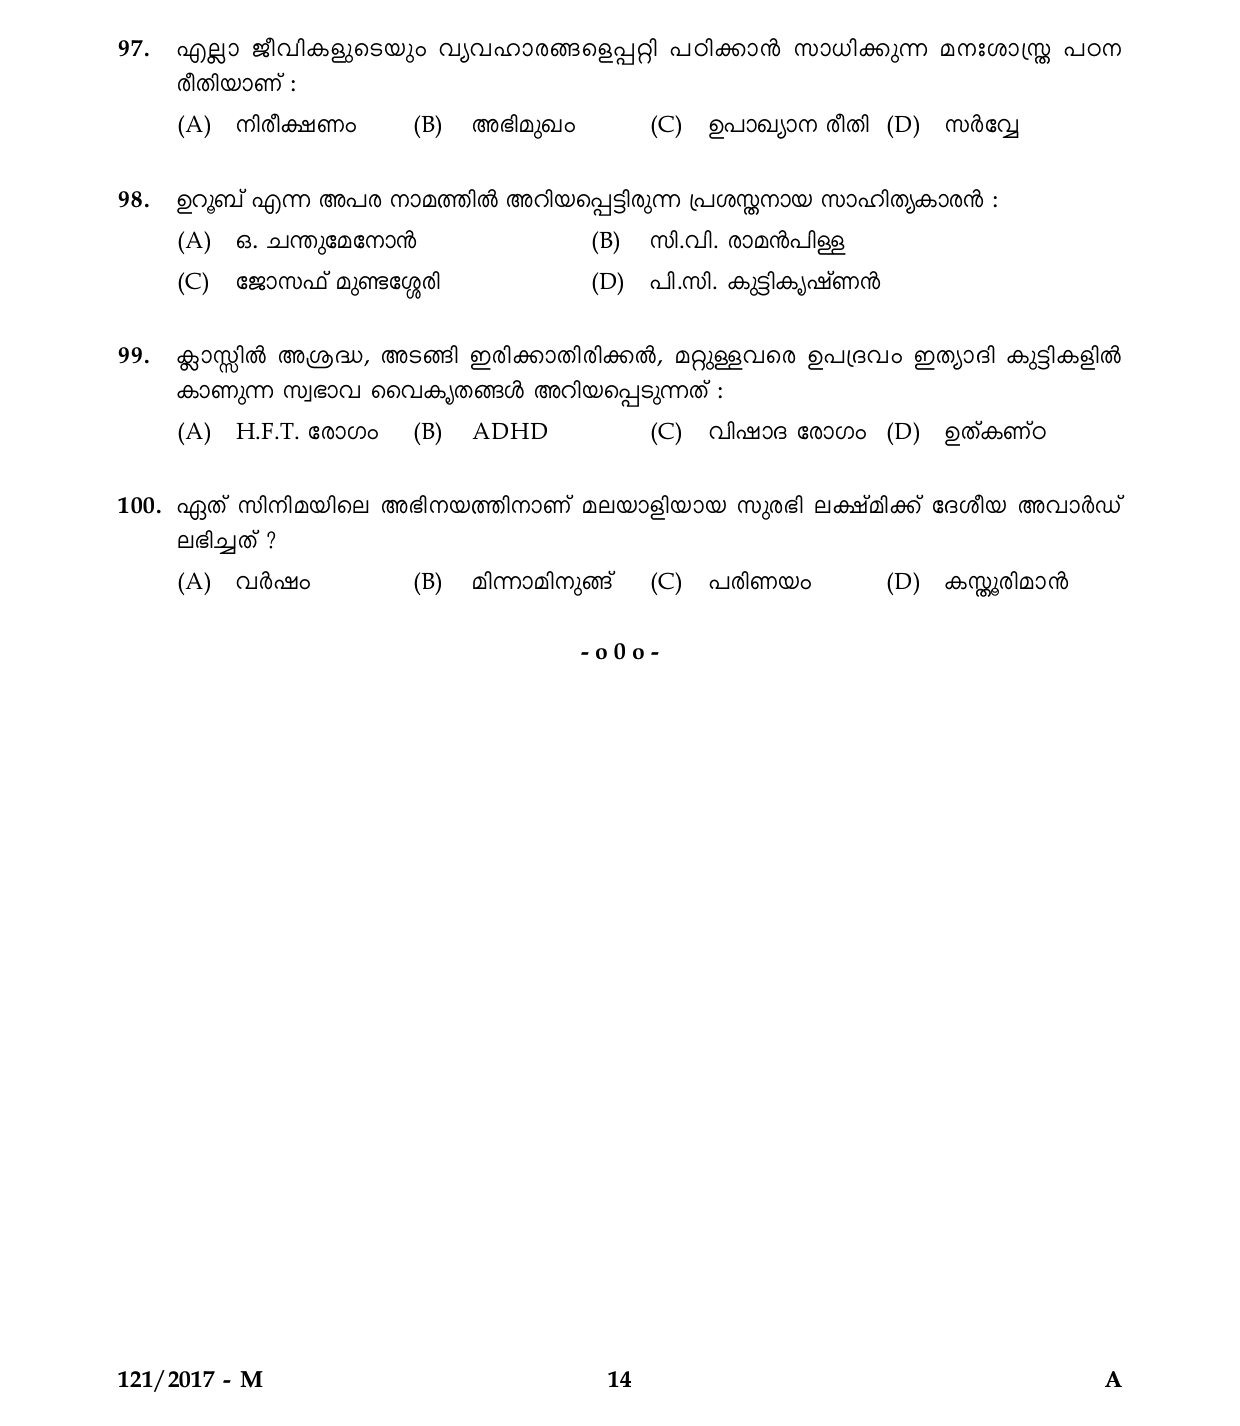 Pre Primary Teacher Question Paper with Answer Key 121/2017 - Kerala PSC